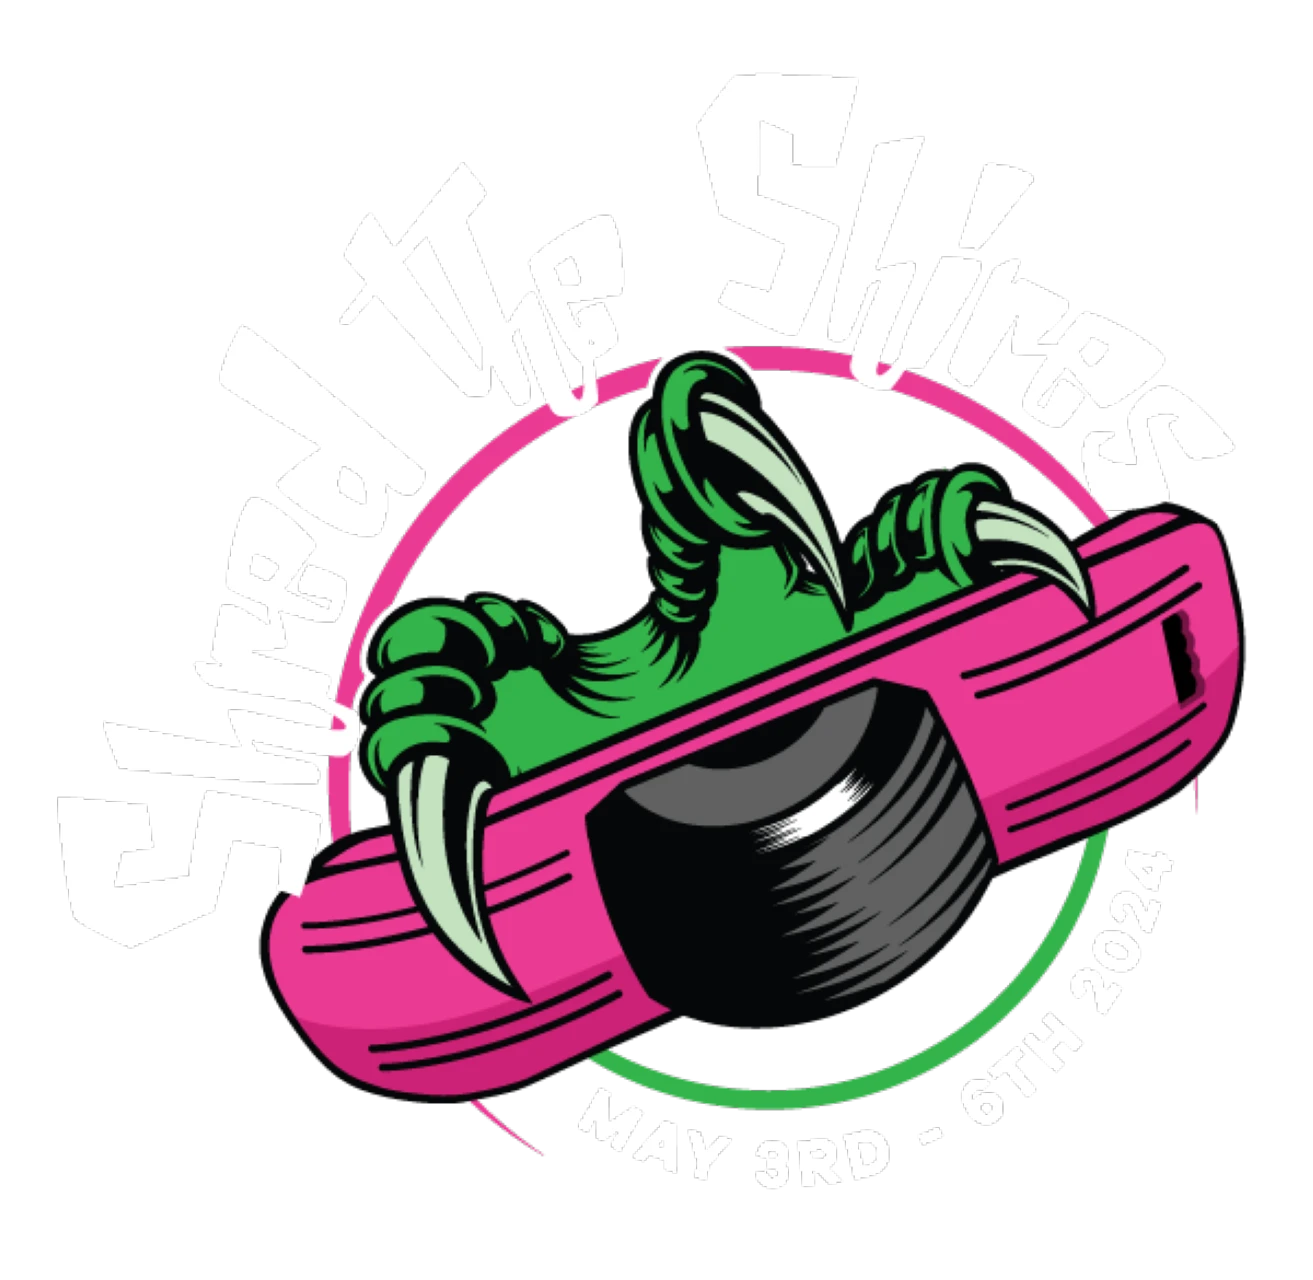 Shred the Shires Logo